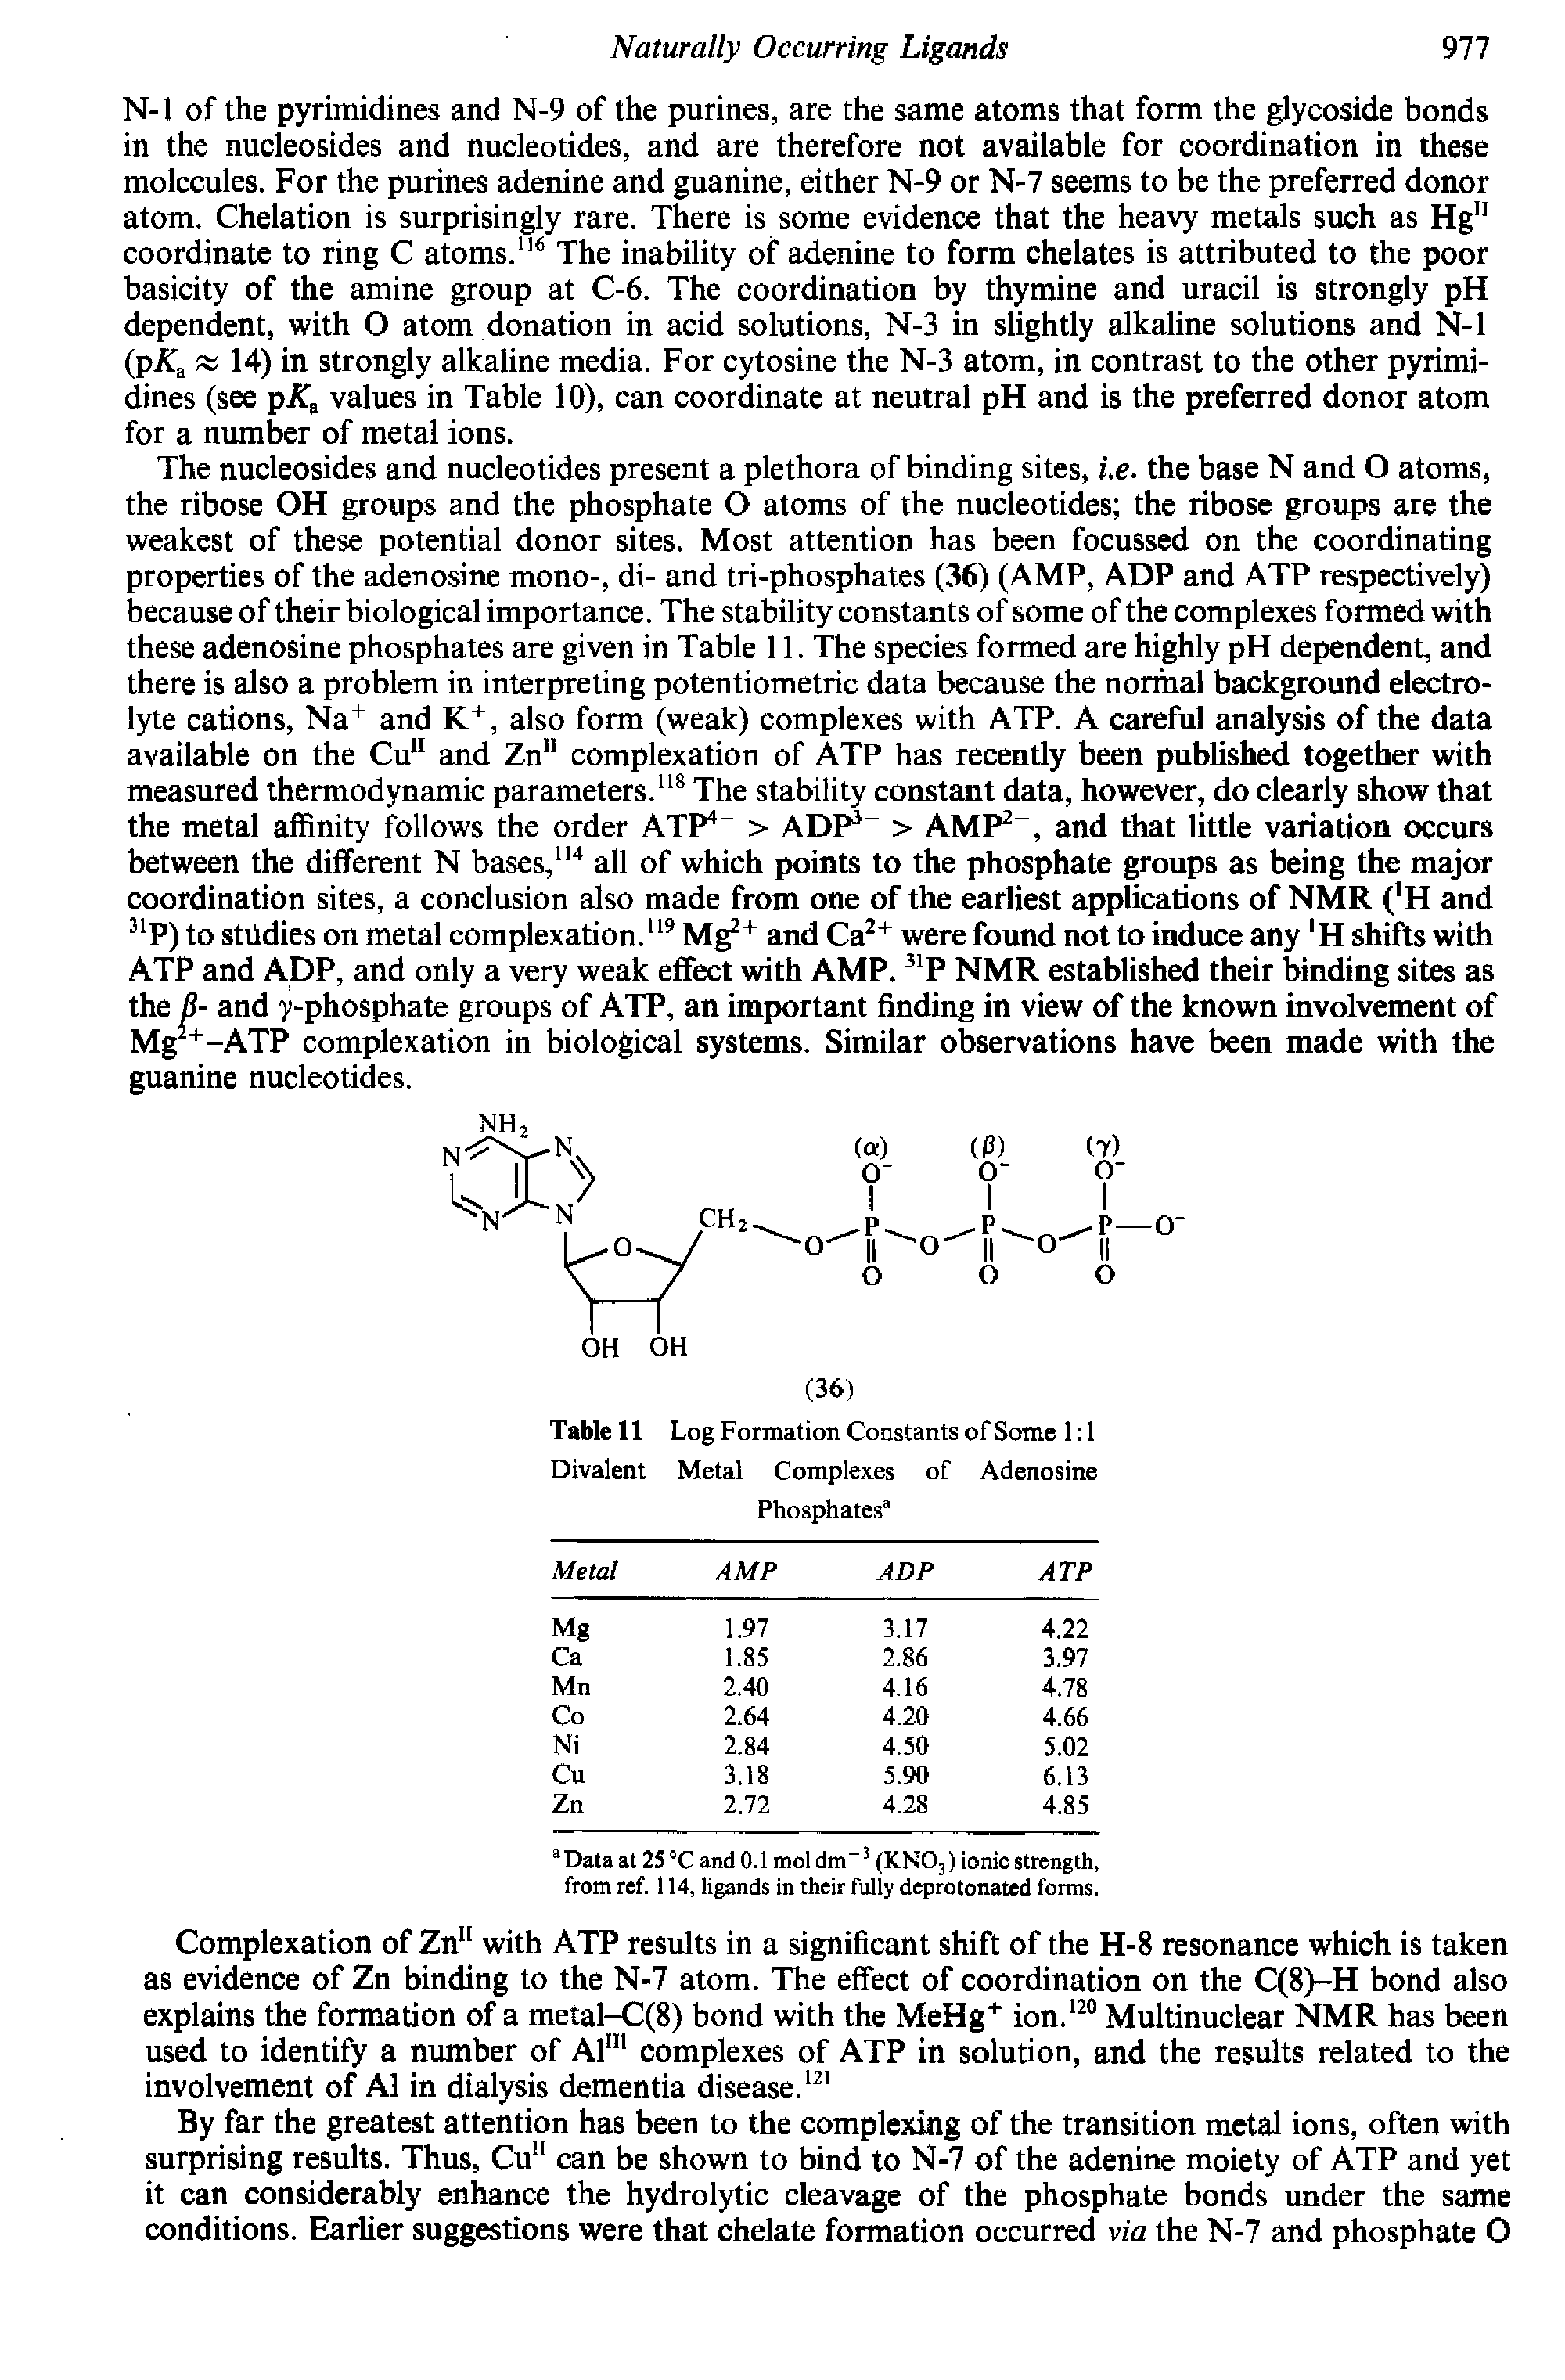 Table 11 Log Formation Constants of Some 1 1 Divalent Metal Complexes of Adenosine Phosphates ...